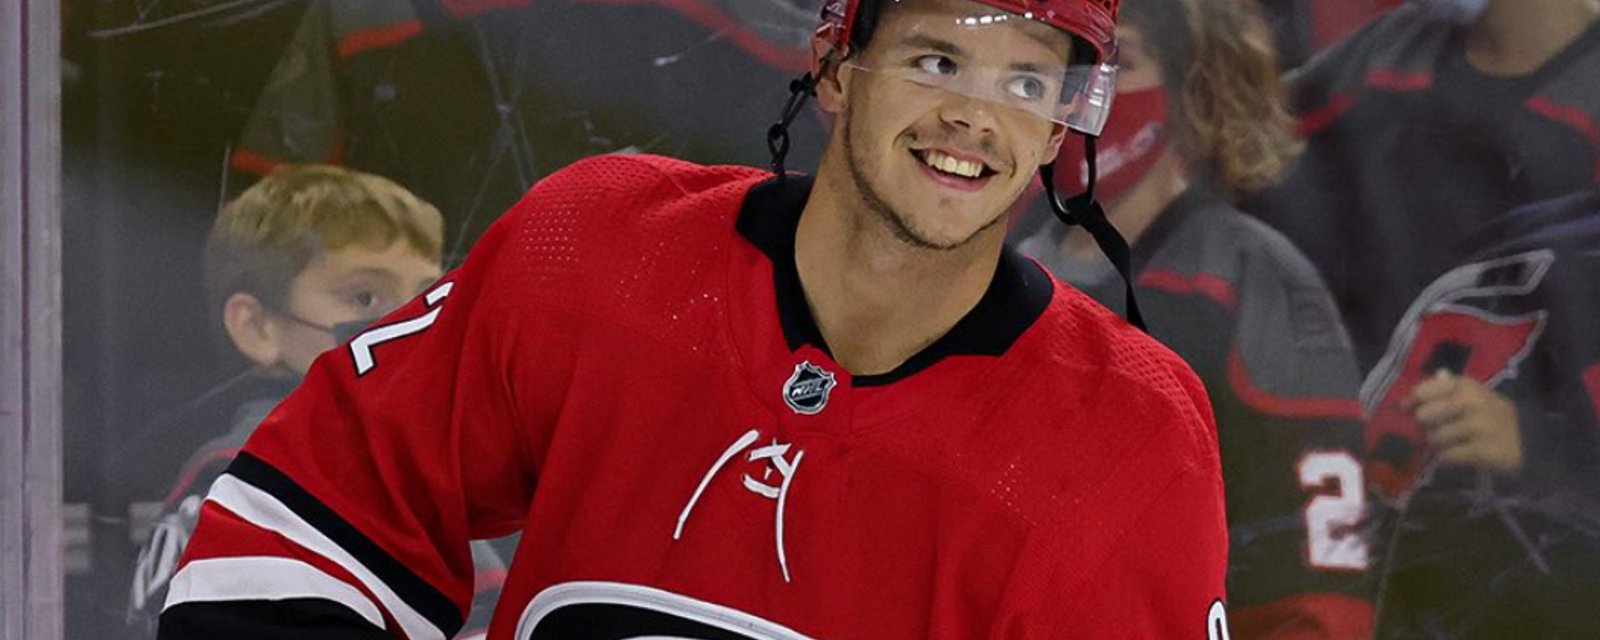 Canes do not stop mocking Habs and their fans after Kotkaniemi’s performance on Tuesday 